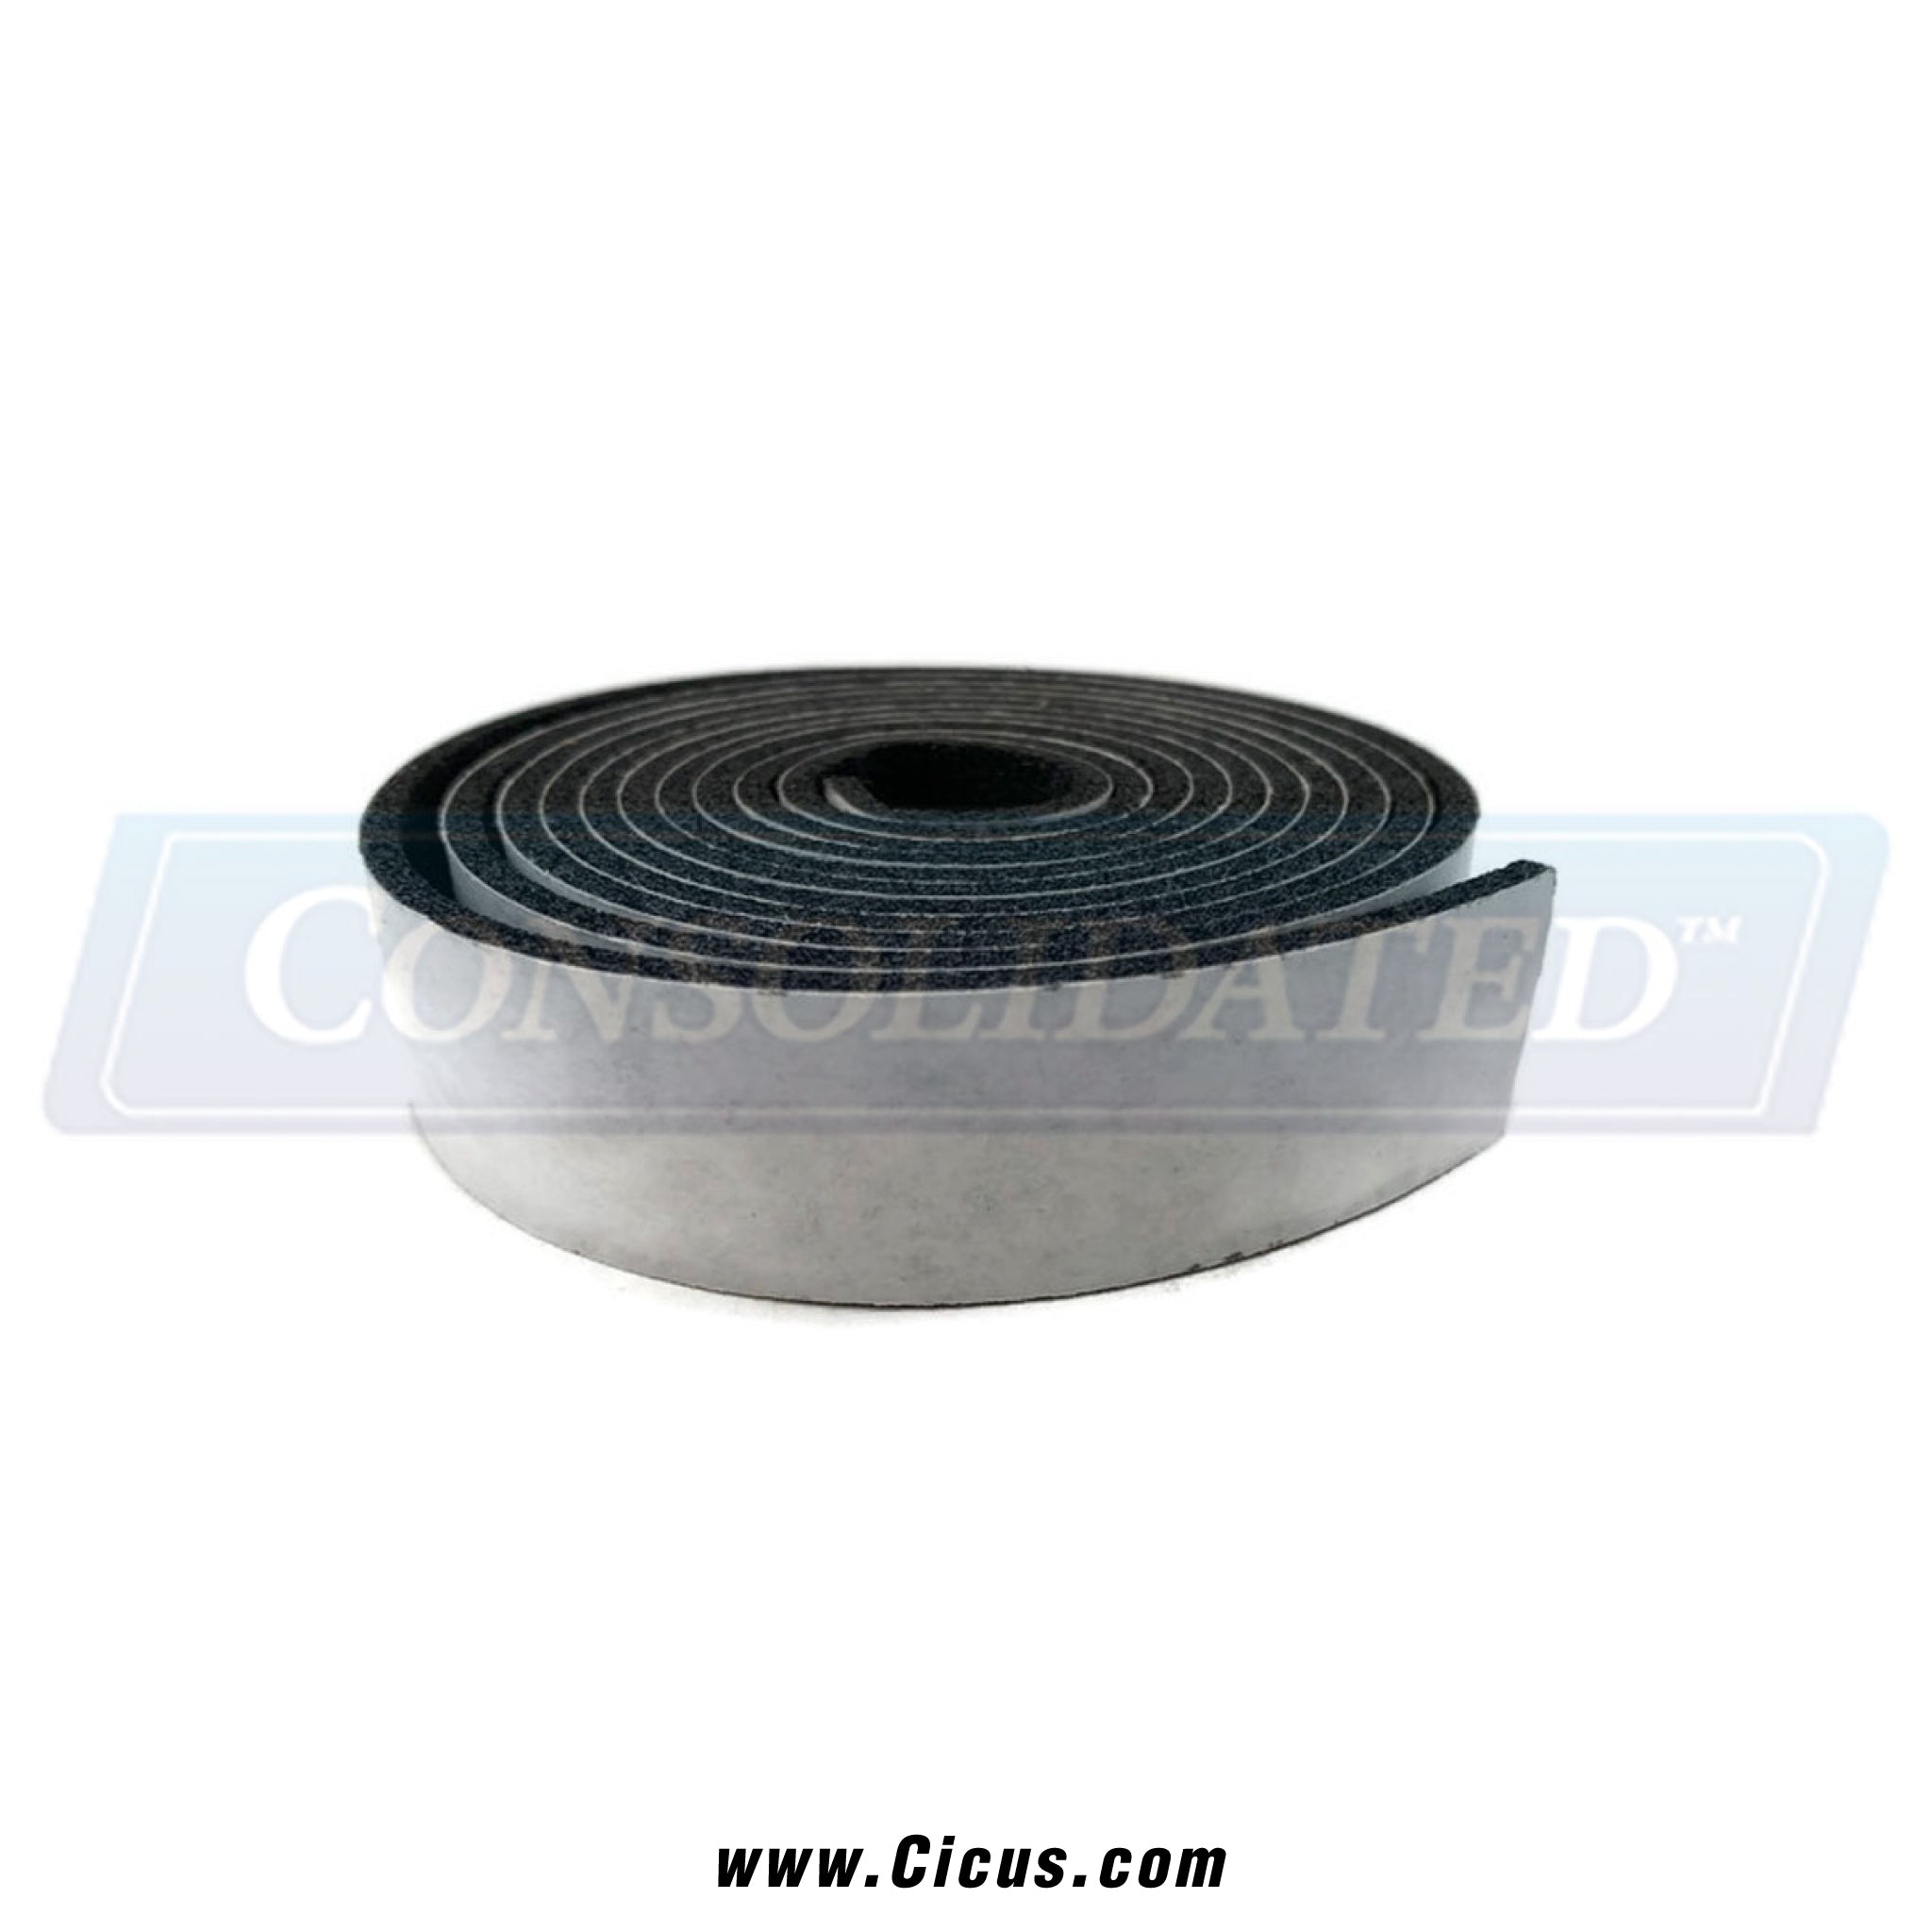 Milnor Neo Rubber Strip 1/8" x 1" CLS - Sold By The Foot [60A003B]